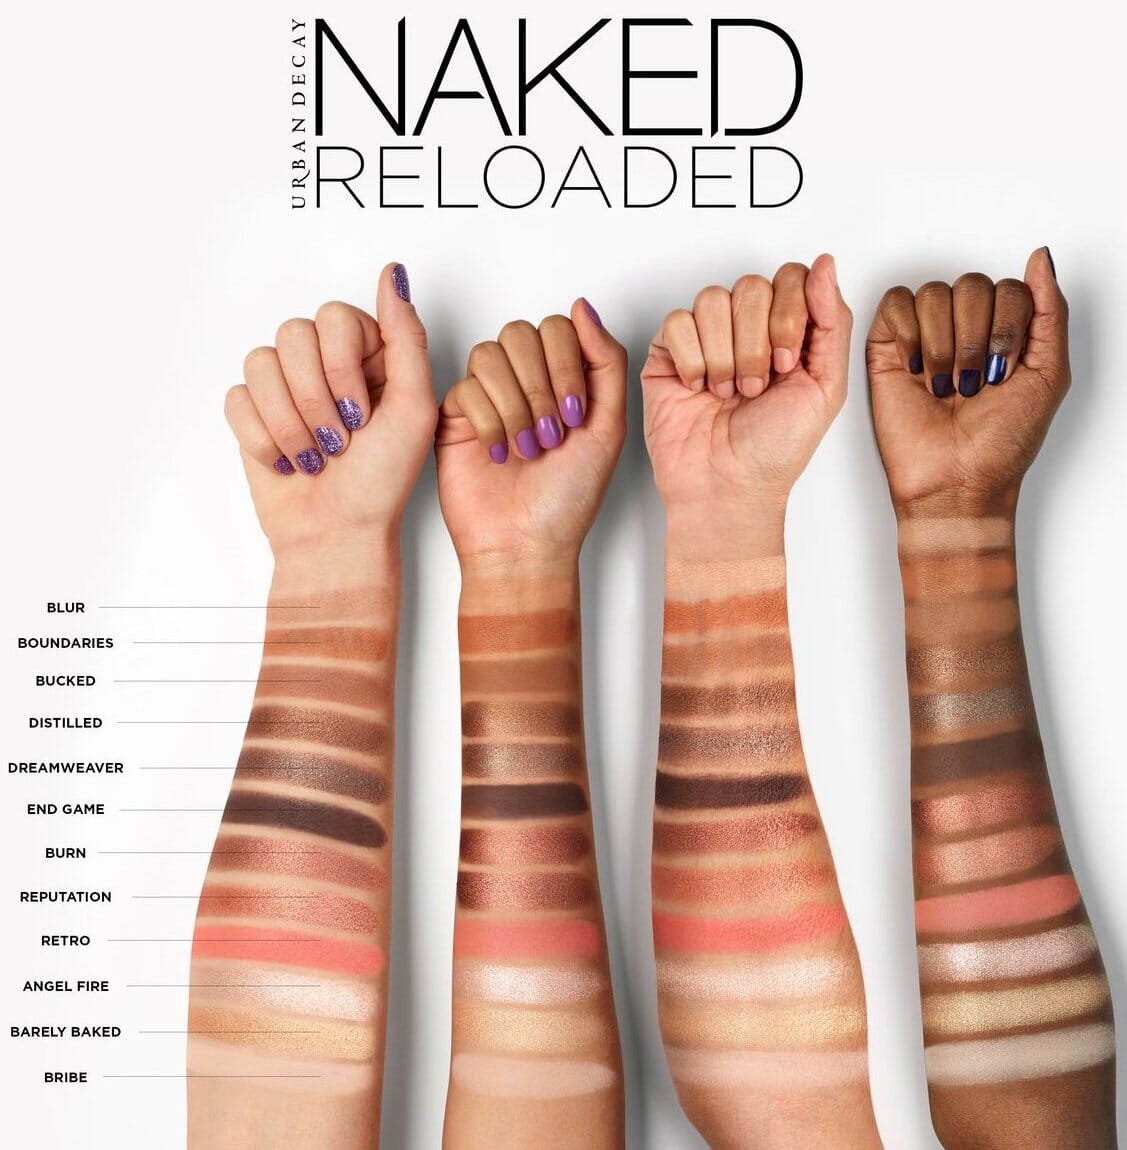 Urban Decay Naked Reloaded Palette swatches #UrbanDecay #NAKEDReloaded